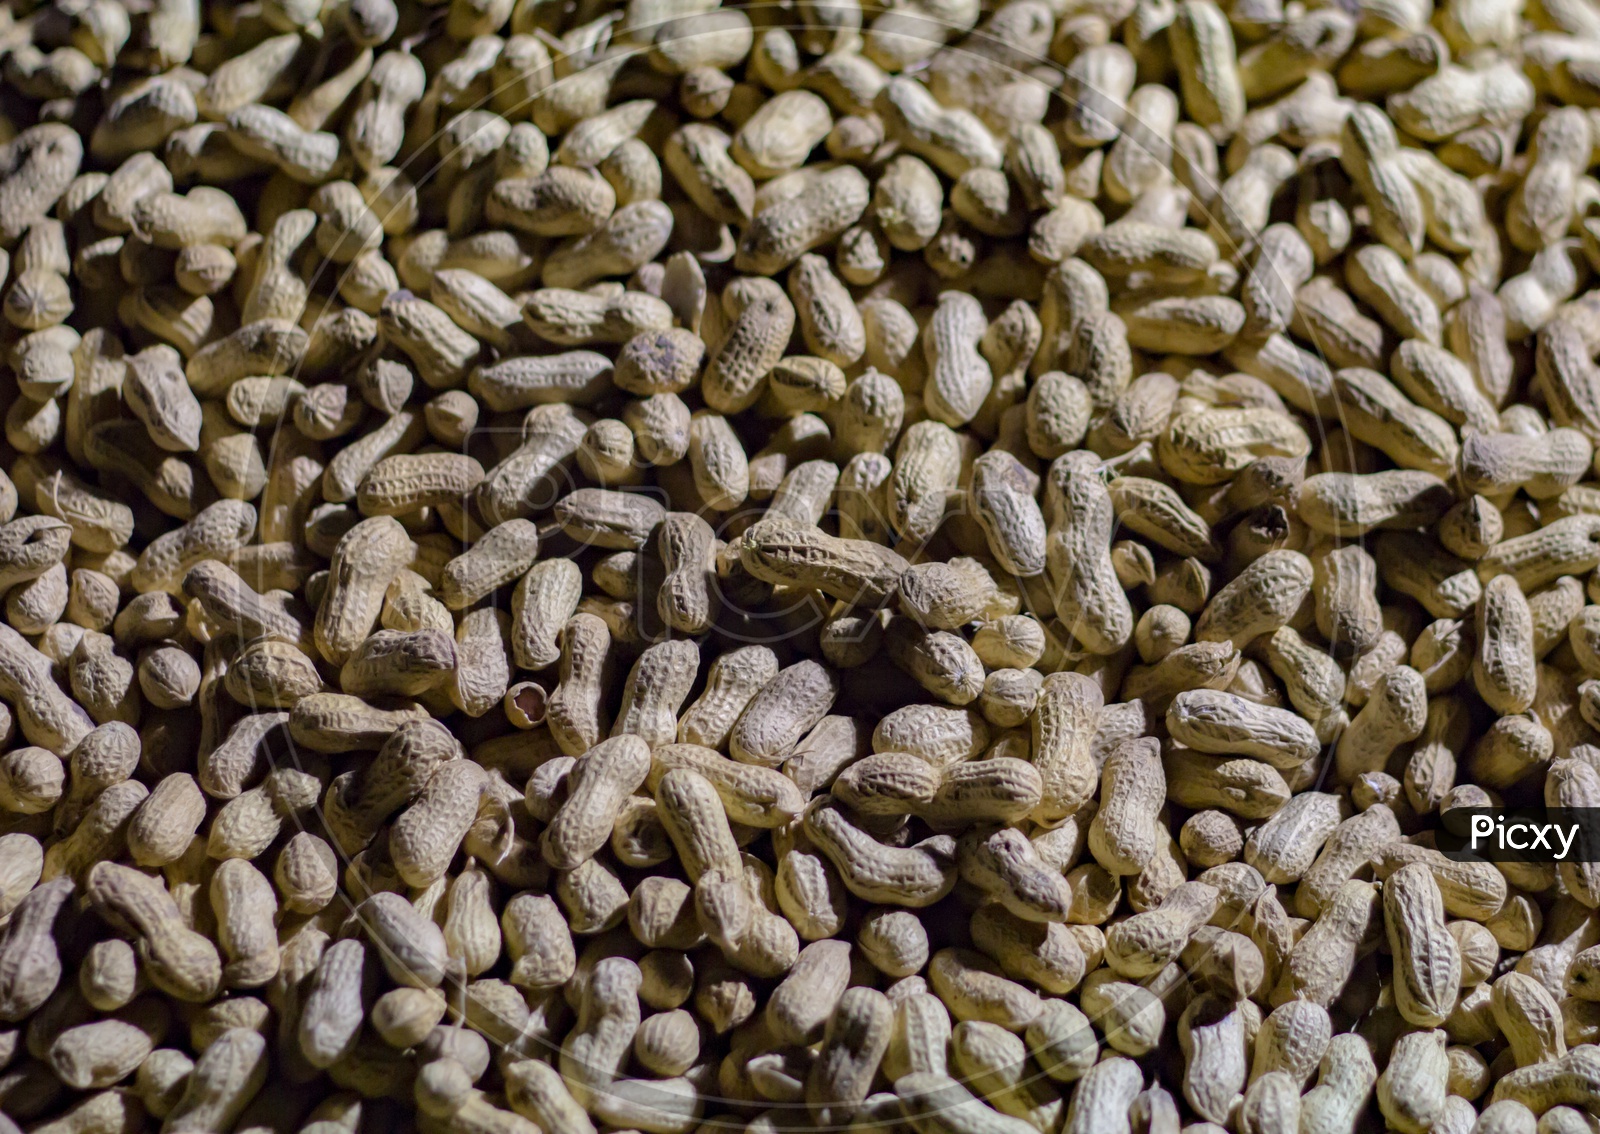 Ground Nuts In A Heap For Sale Close Up. Peanut With Shell.